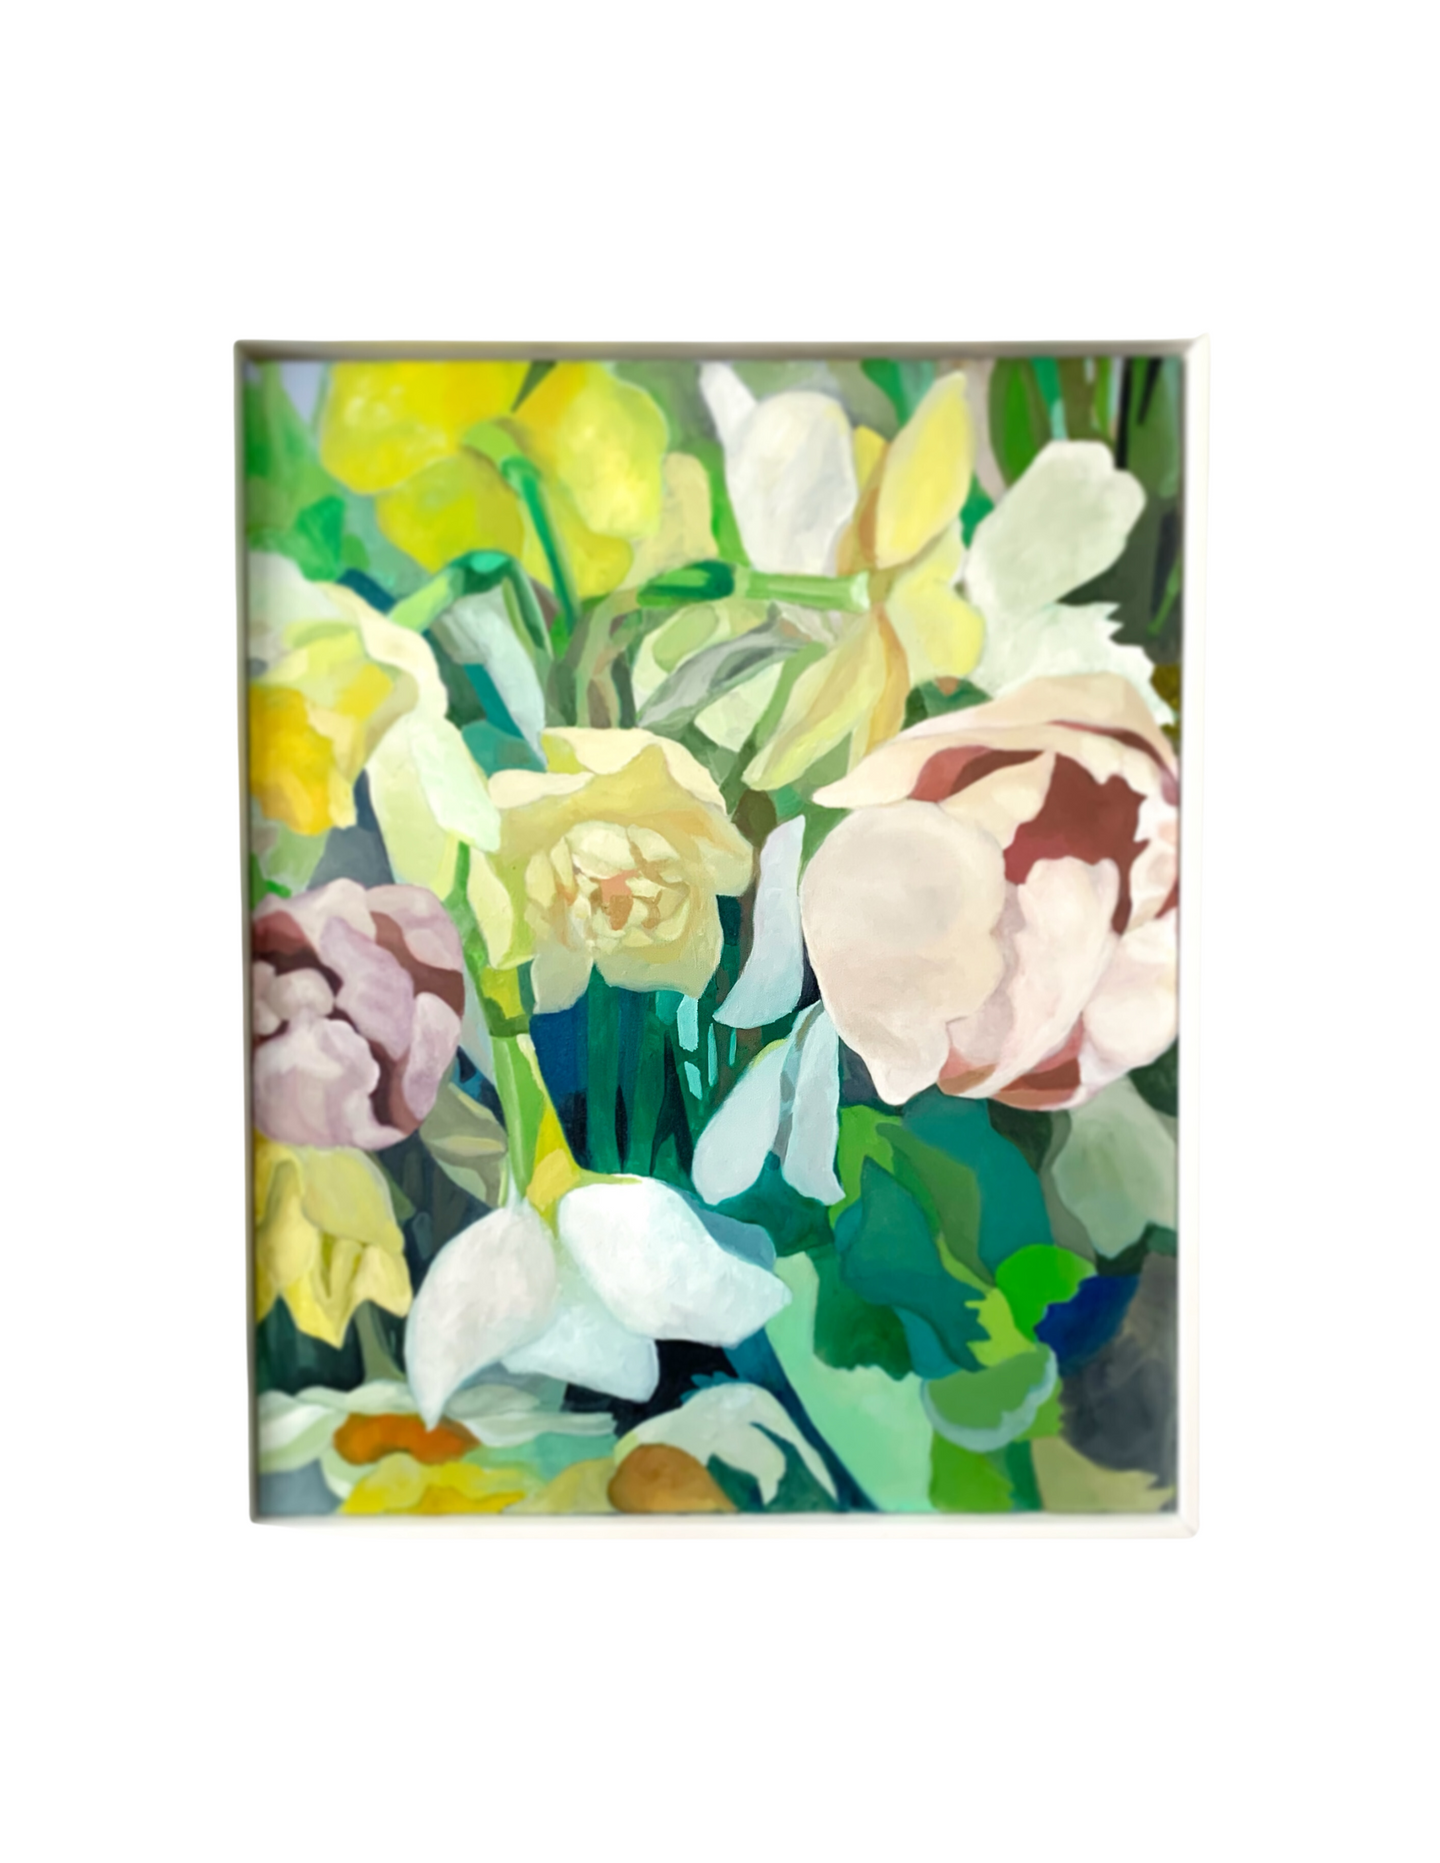 Spring Bouquet 24 x 30 Framed Original Oil Paintings On Canvas